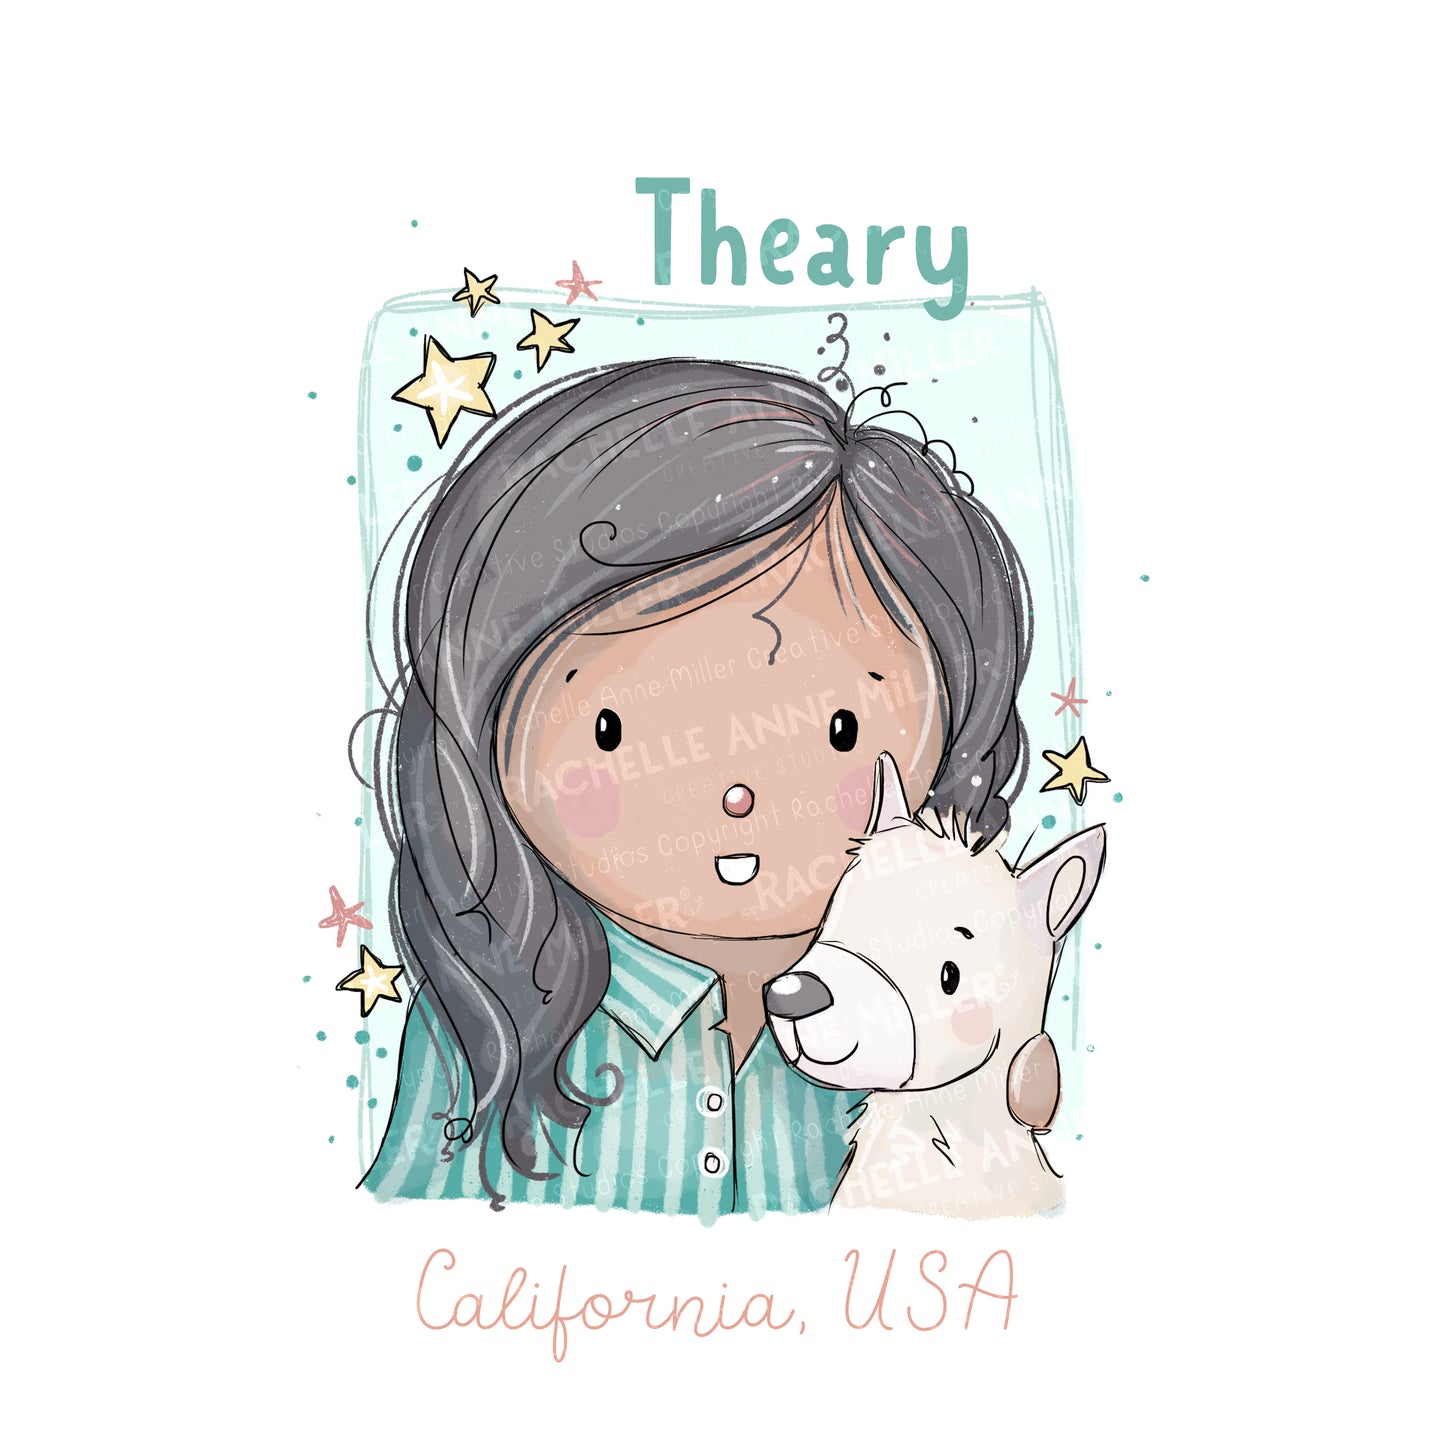 'Theary's Pup' Profile Digital Stamp